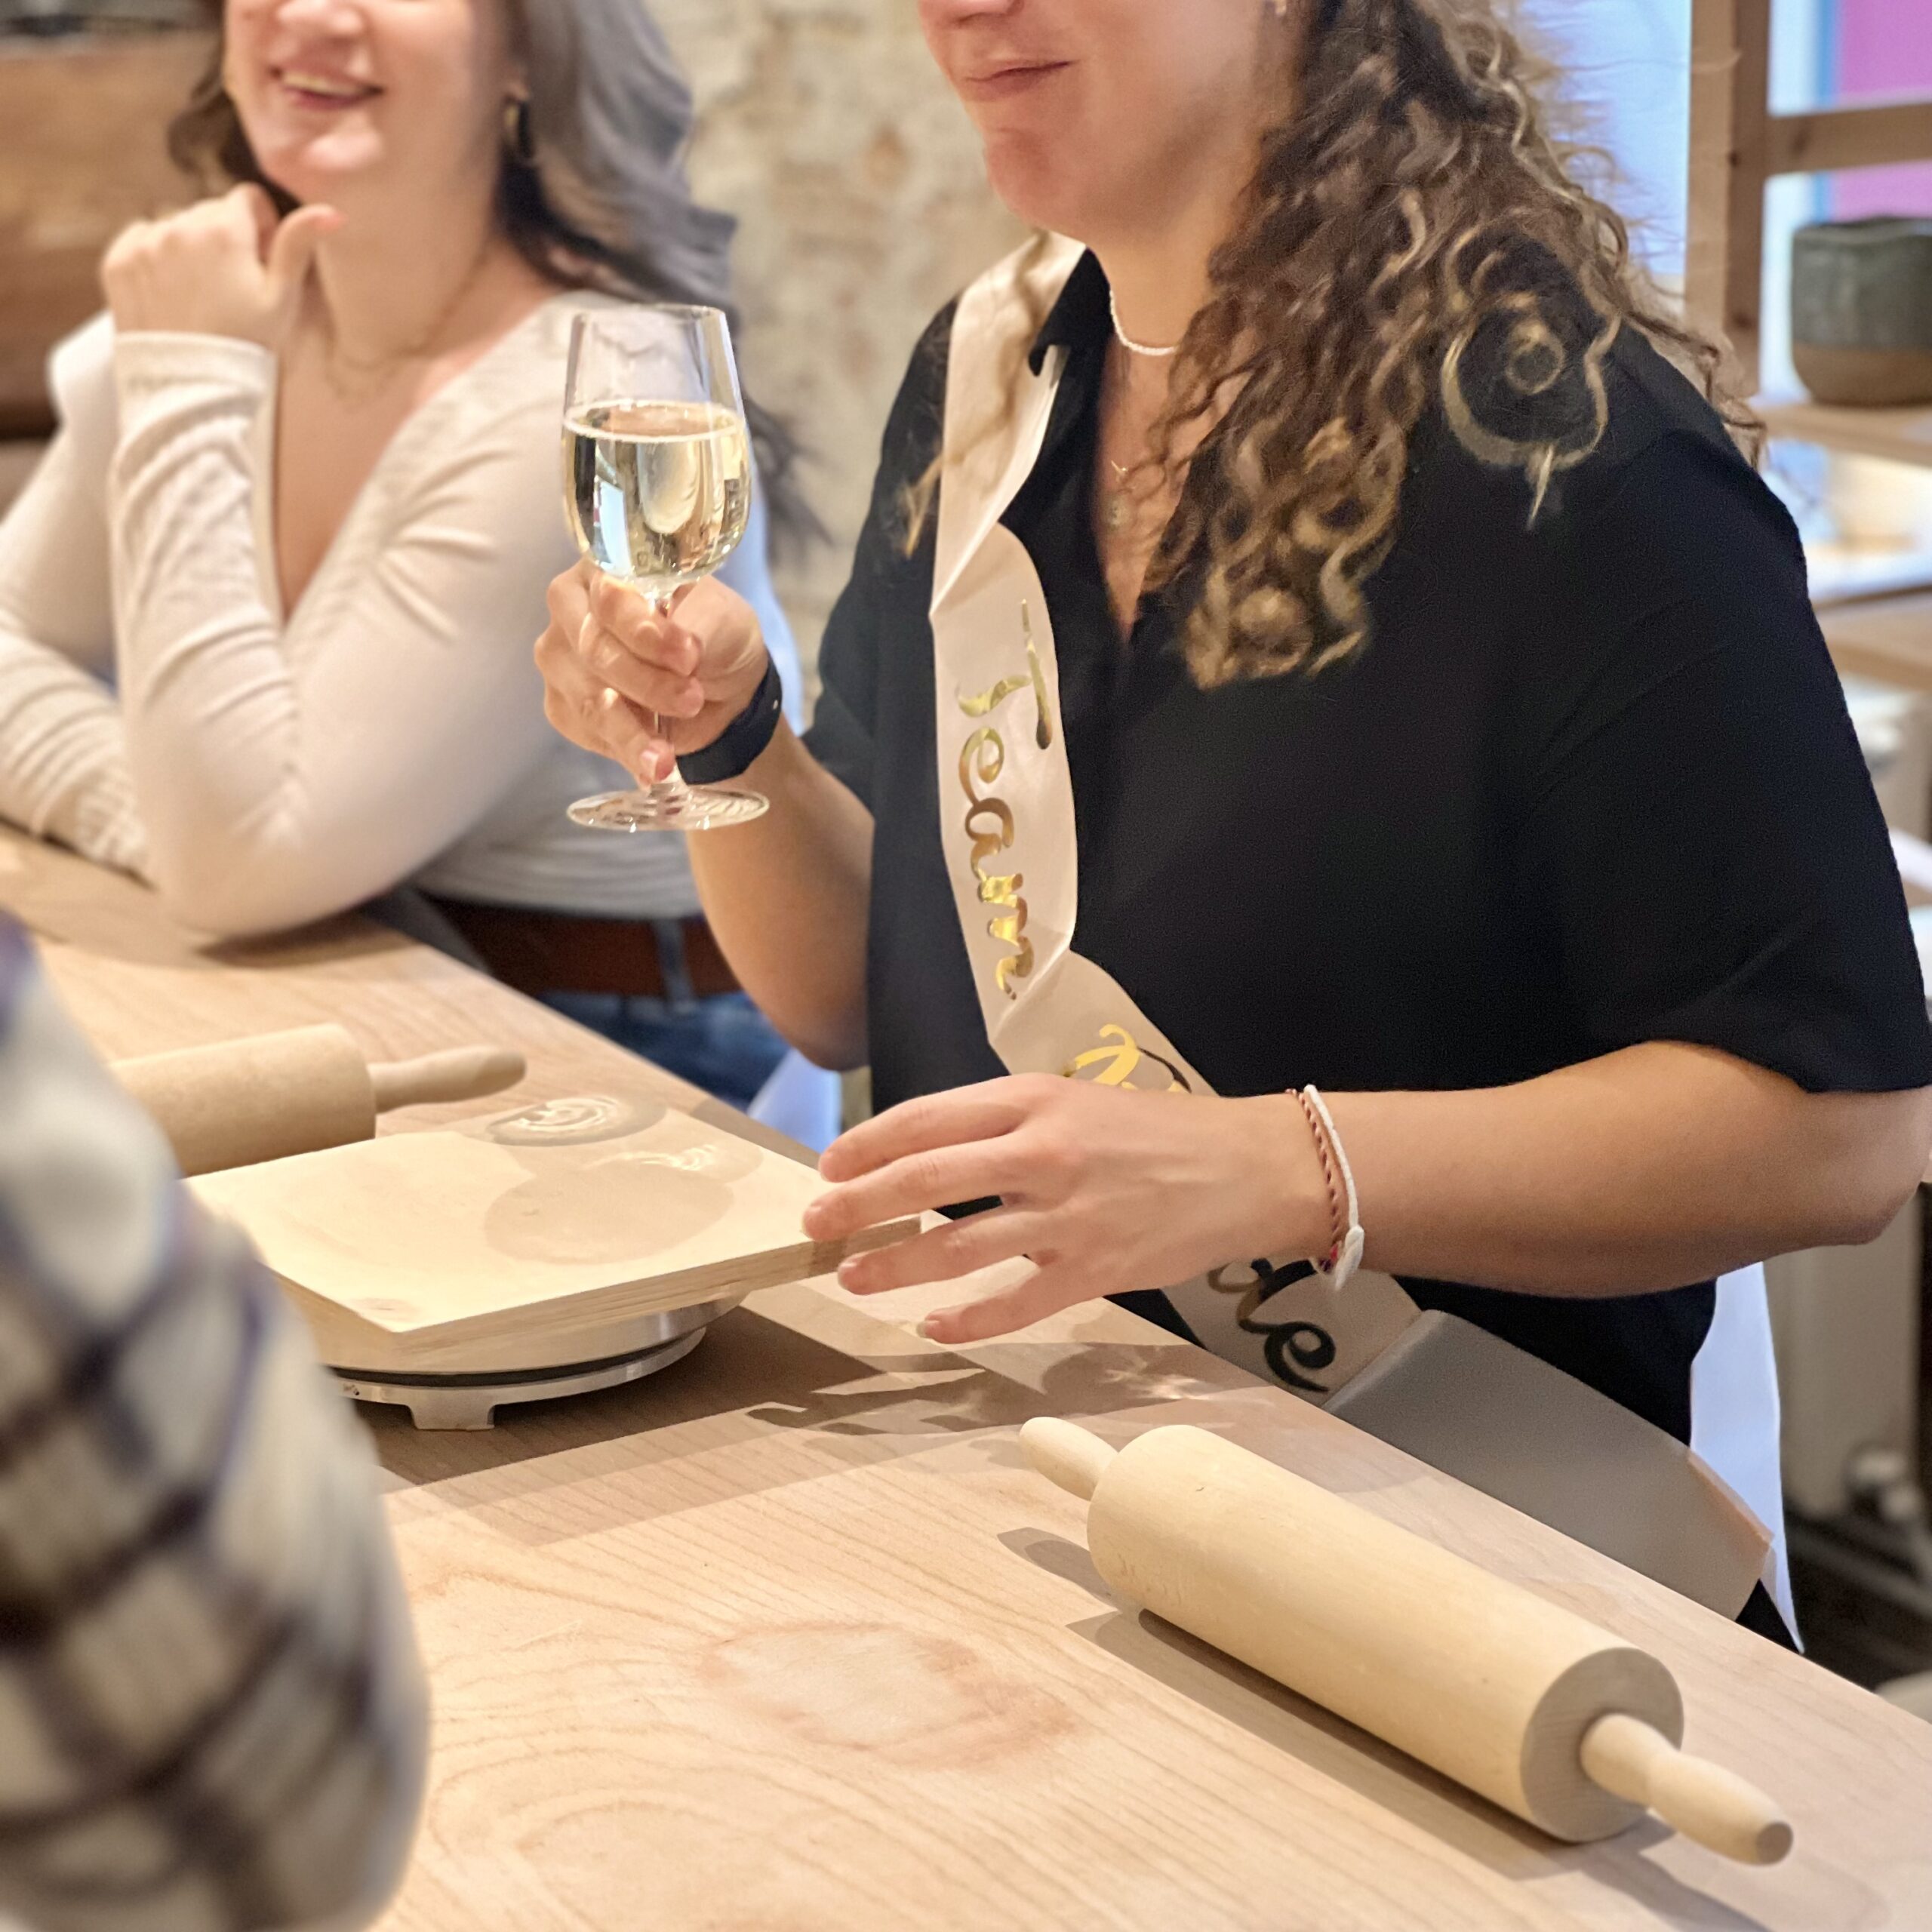 Wine & Clay Private Kurs Hietzing (16+)